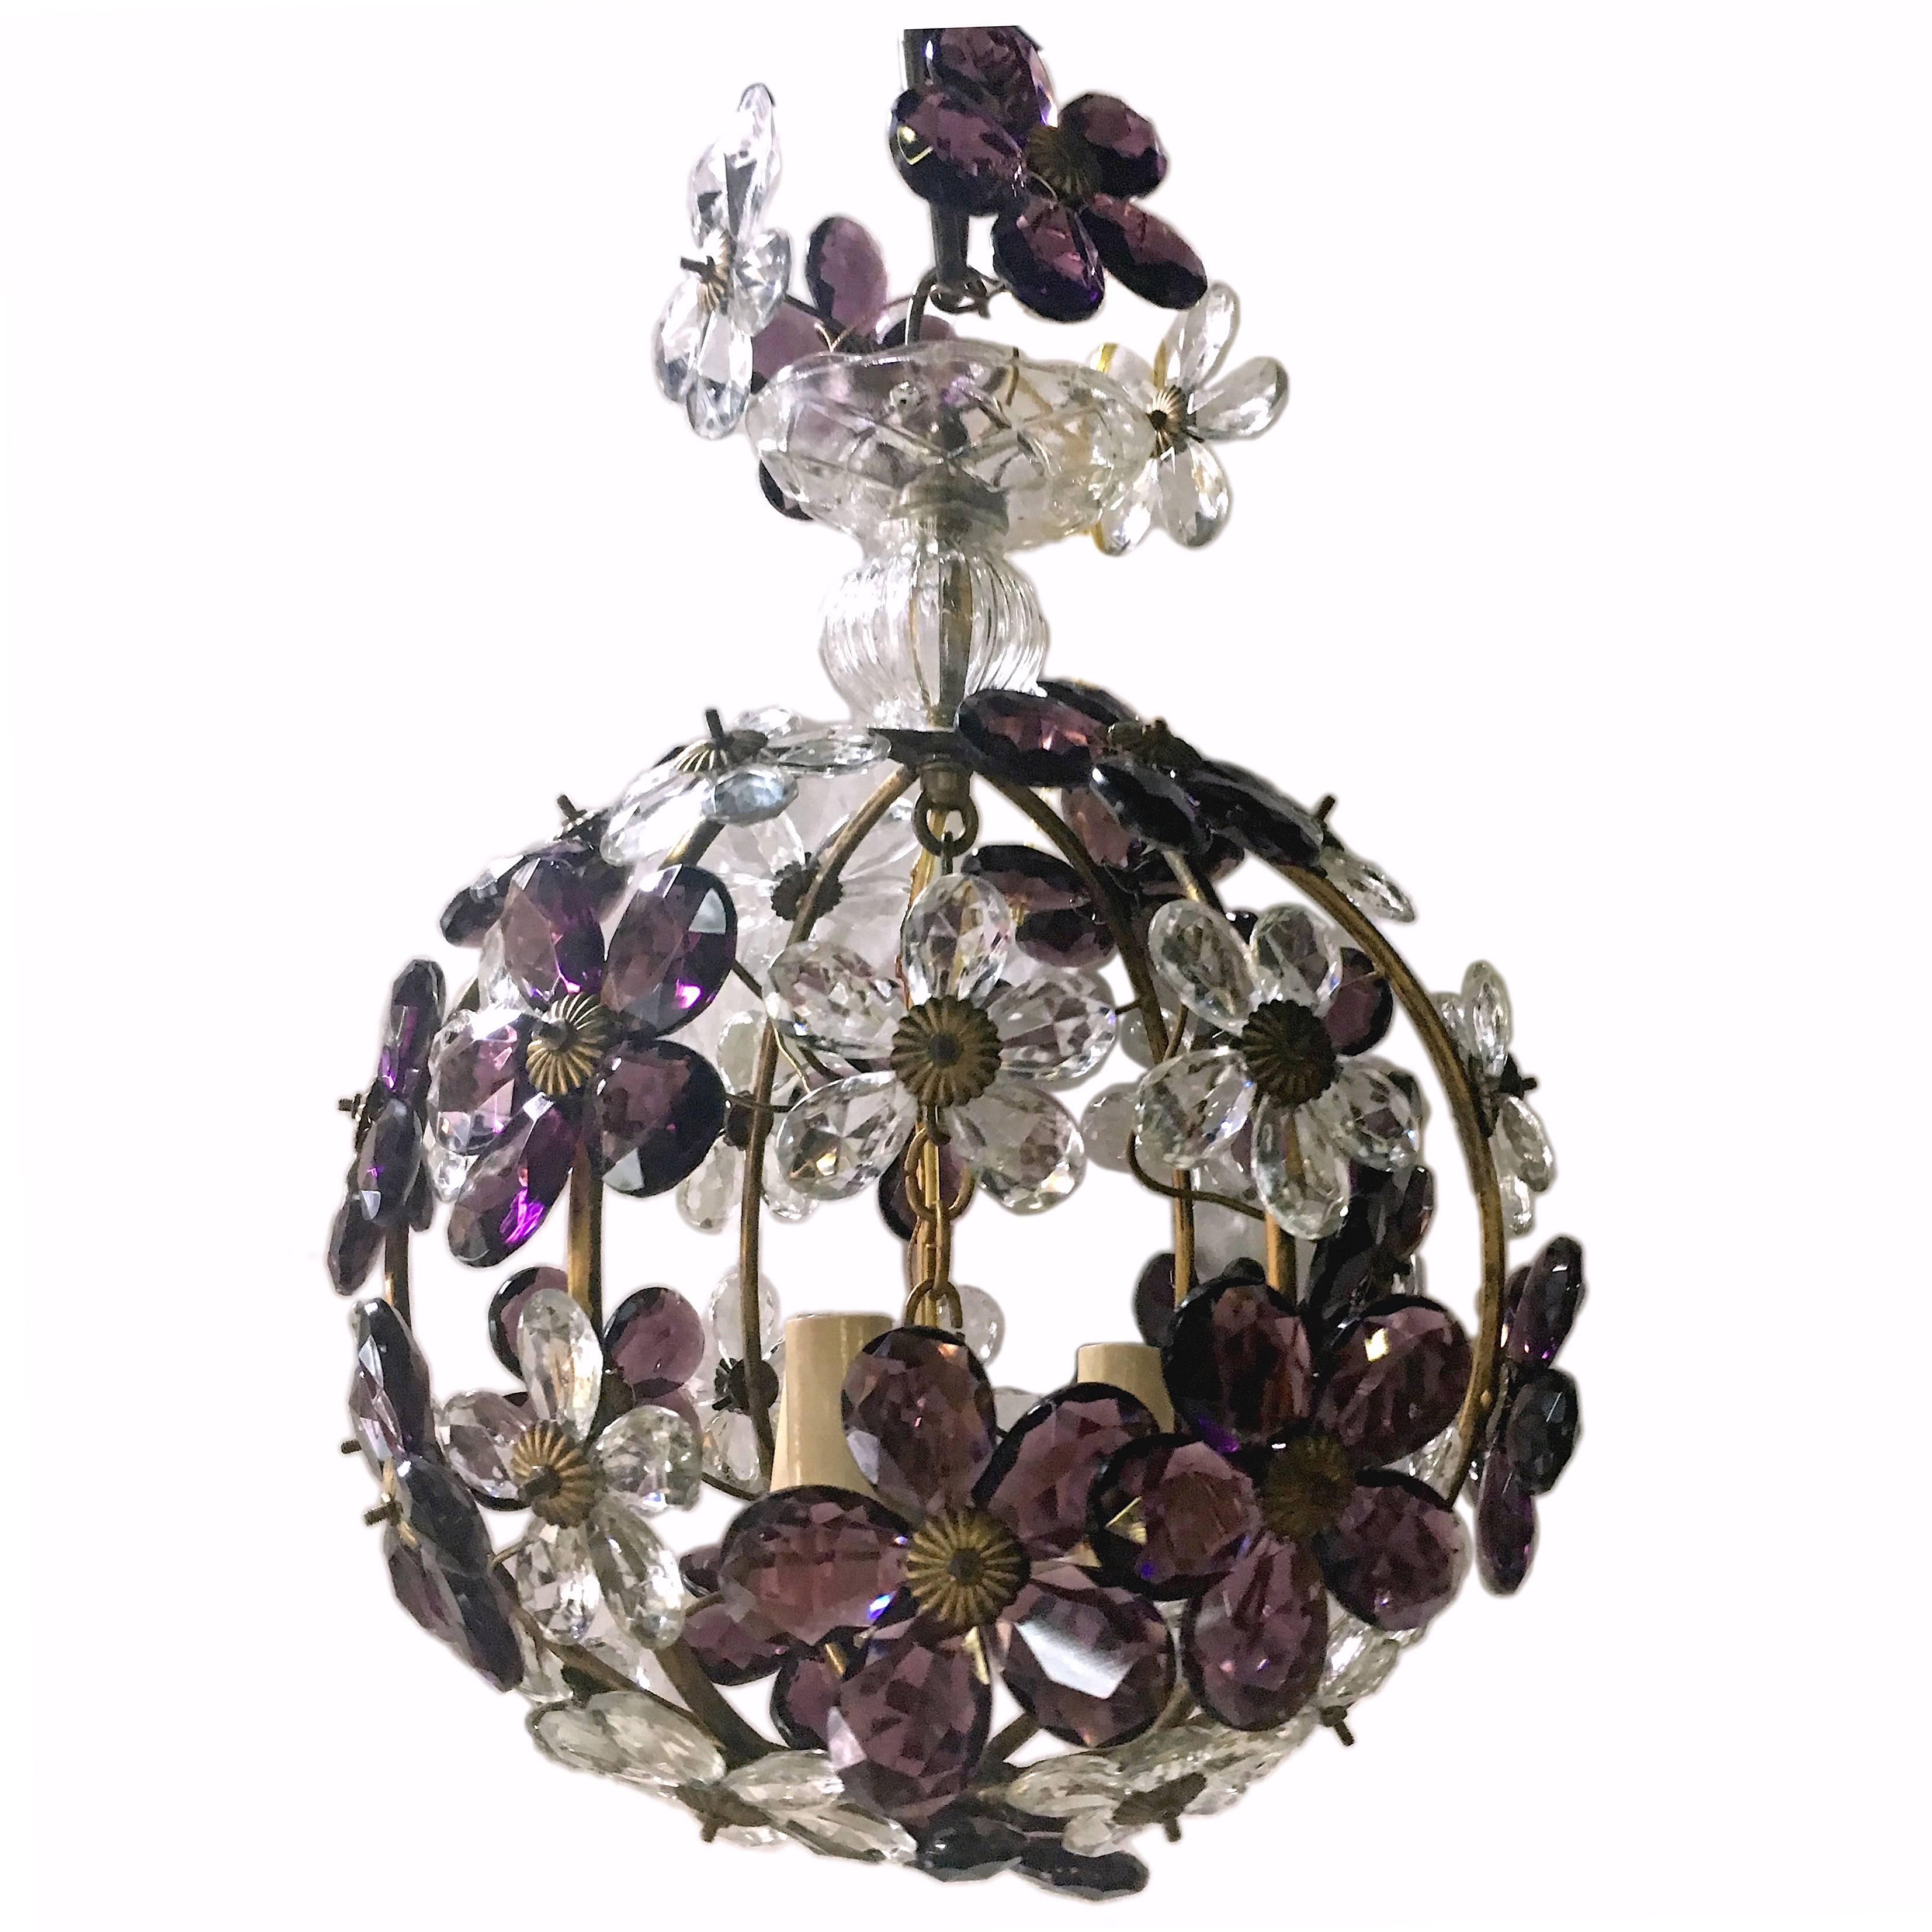 A circa 1940's French gilt metal lantern with amethyst and clear crystal flowers lantern with 3 interior lights. 

Measurements:
Drop: 16